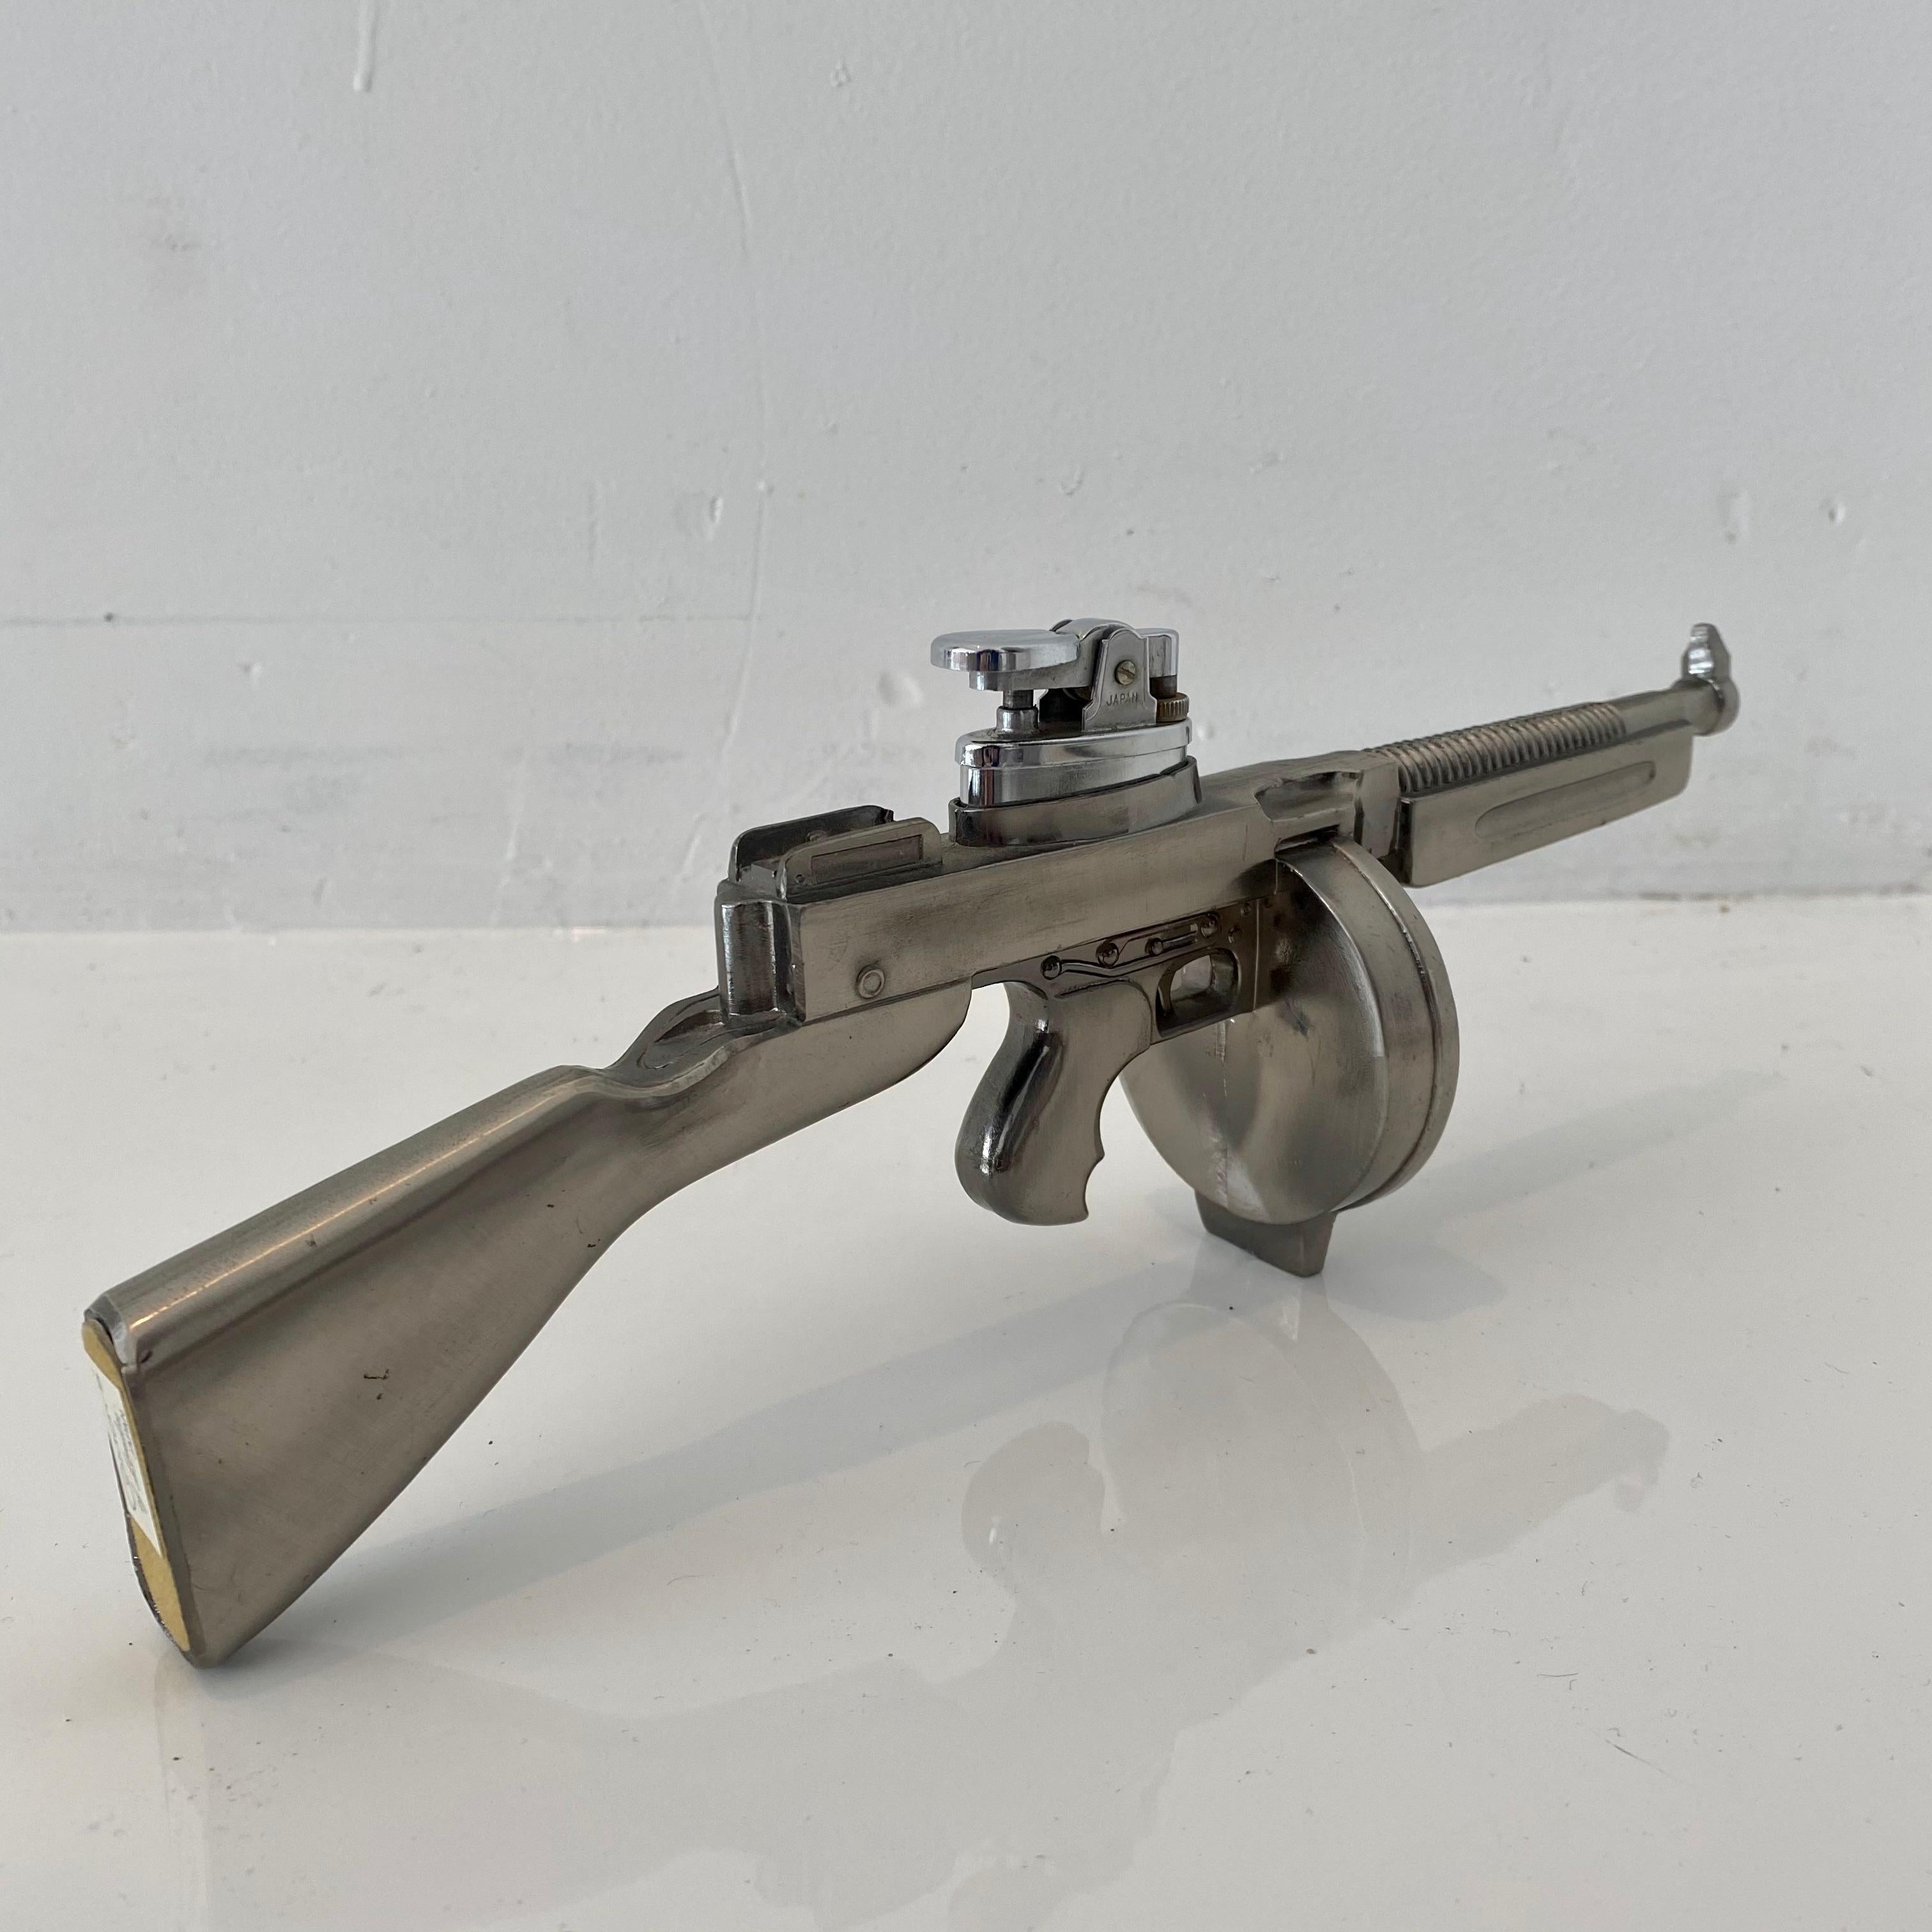 Cool vintage table lighter in the shape of a Thompson M1921 machine gun. Made of metal. Label at bottom reads 